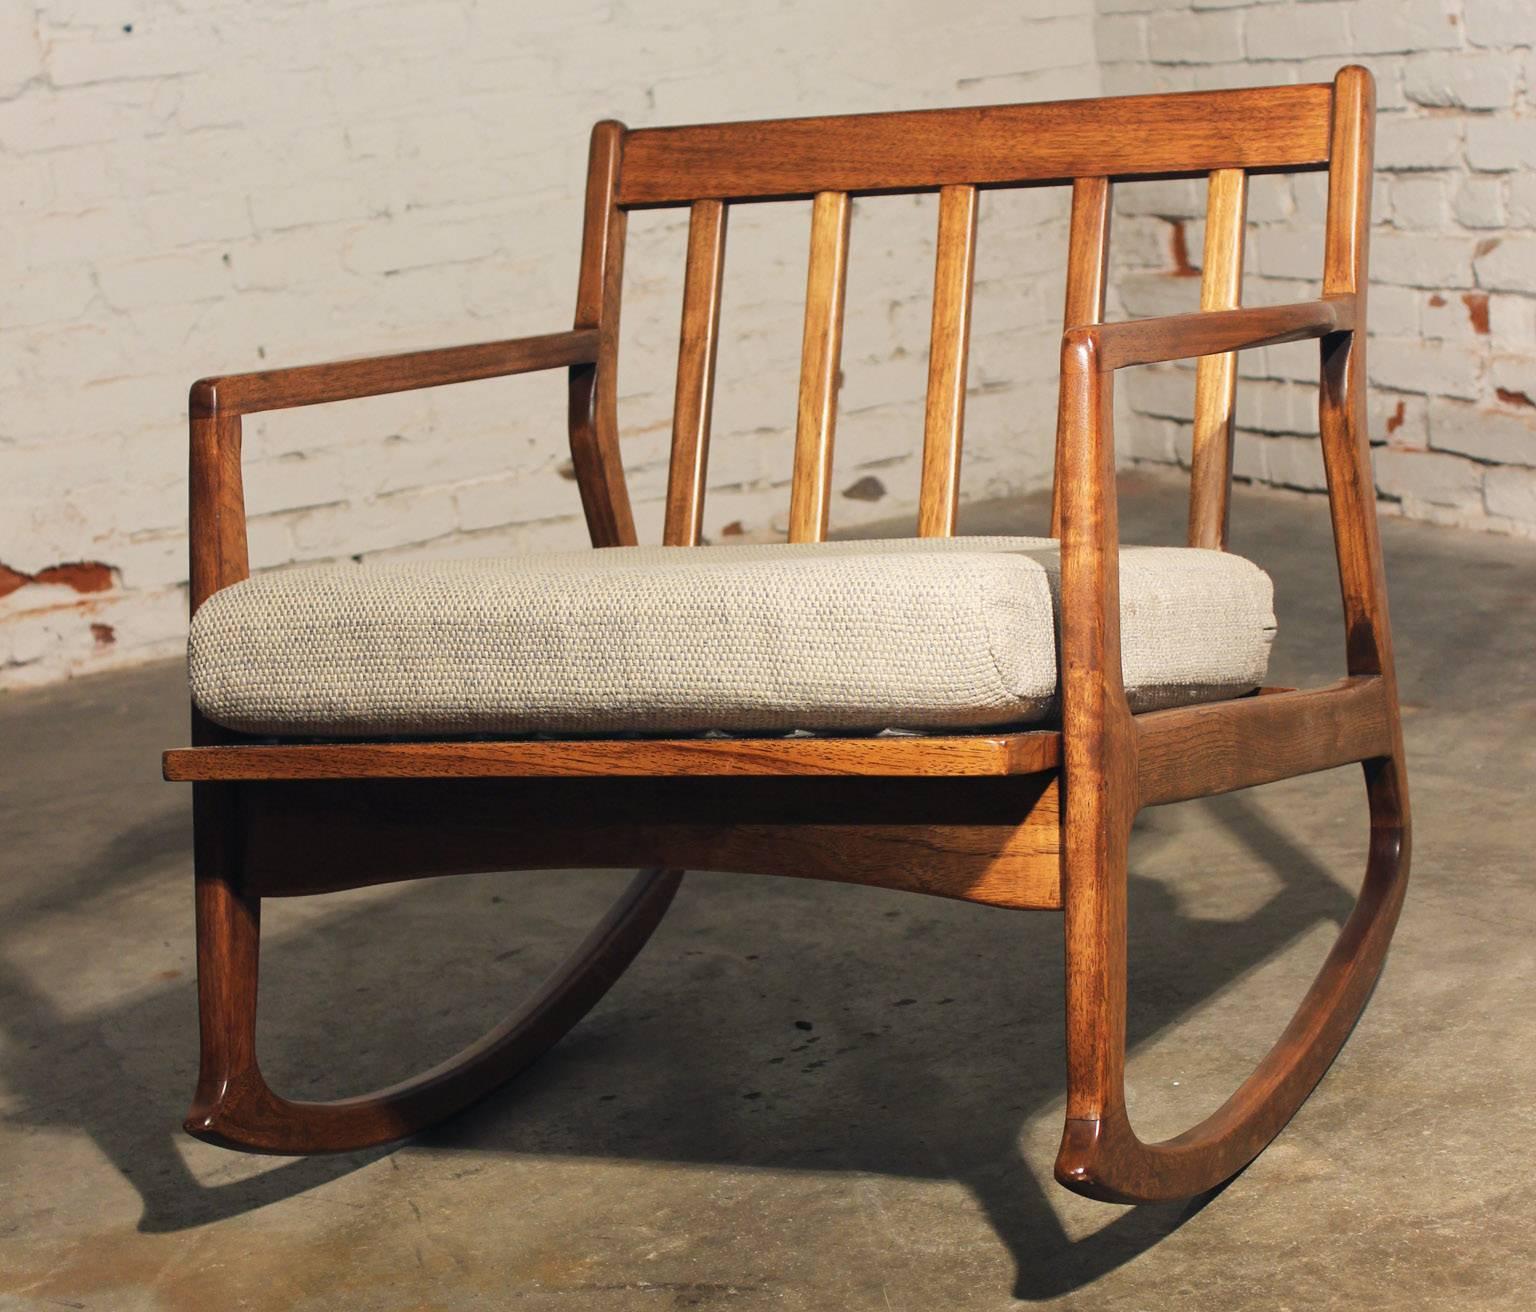 Wonderful Mid-Century Danish Modern rocker in great vintage age appropriate condition.

Here, in my opinion, is one of the hardest pieces of mid-Century Furniture to find a rocking chair! And this one is a wonderful example. The wood on this